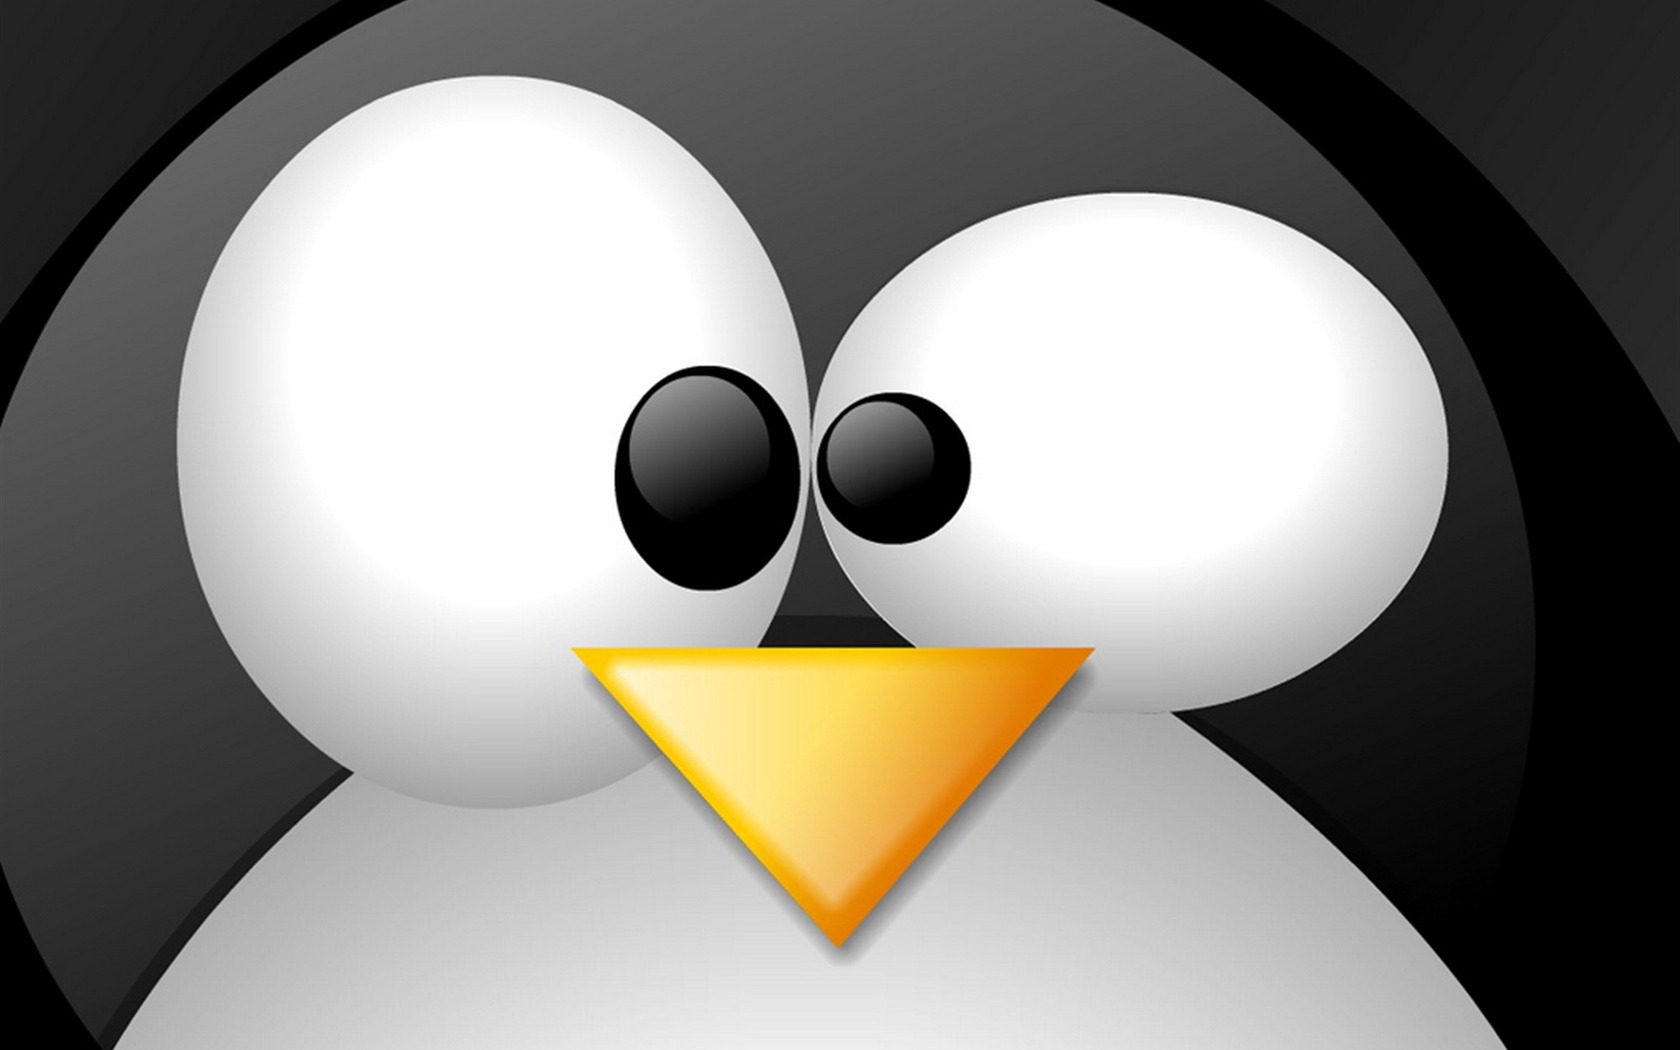 Linux tapety (3) #16 - 1680x1050